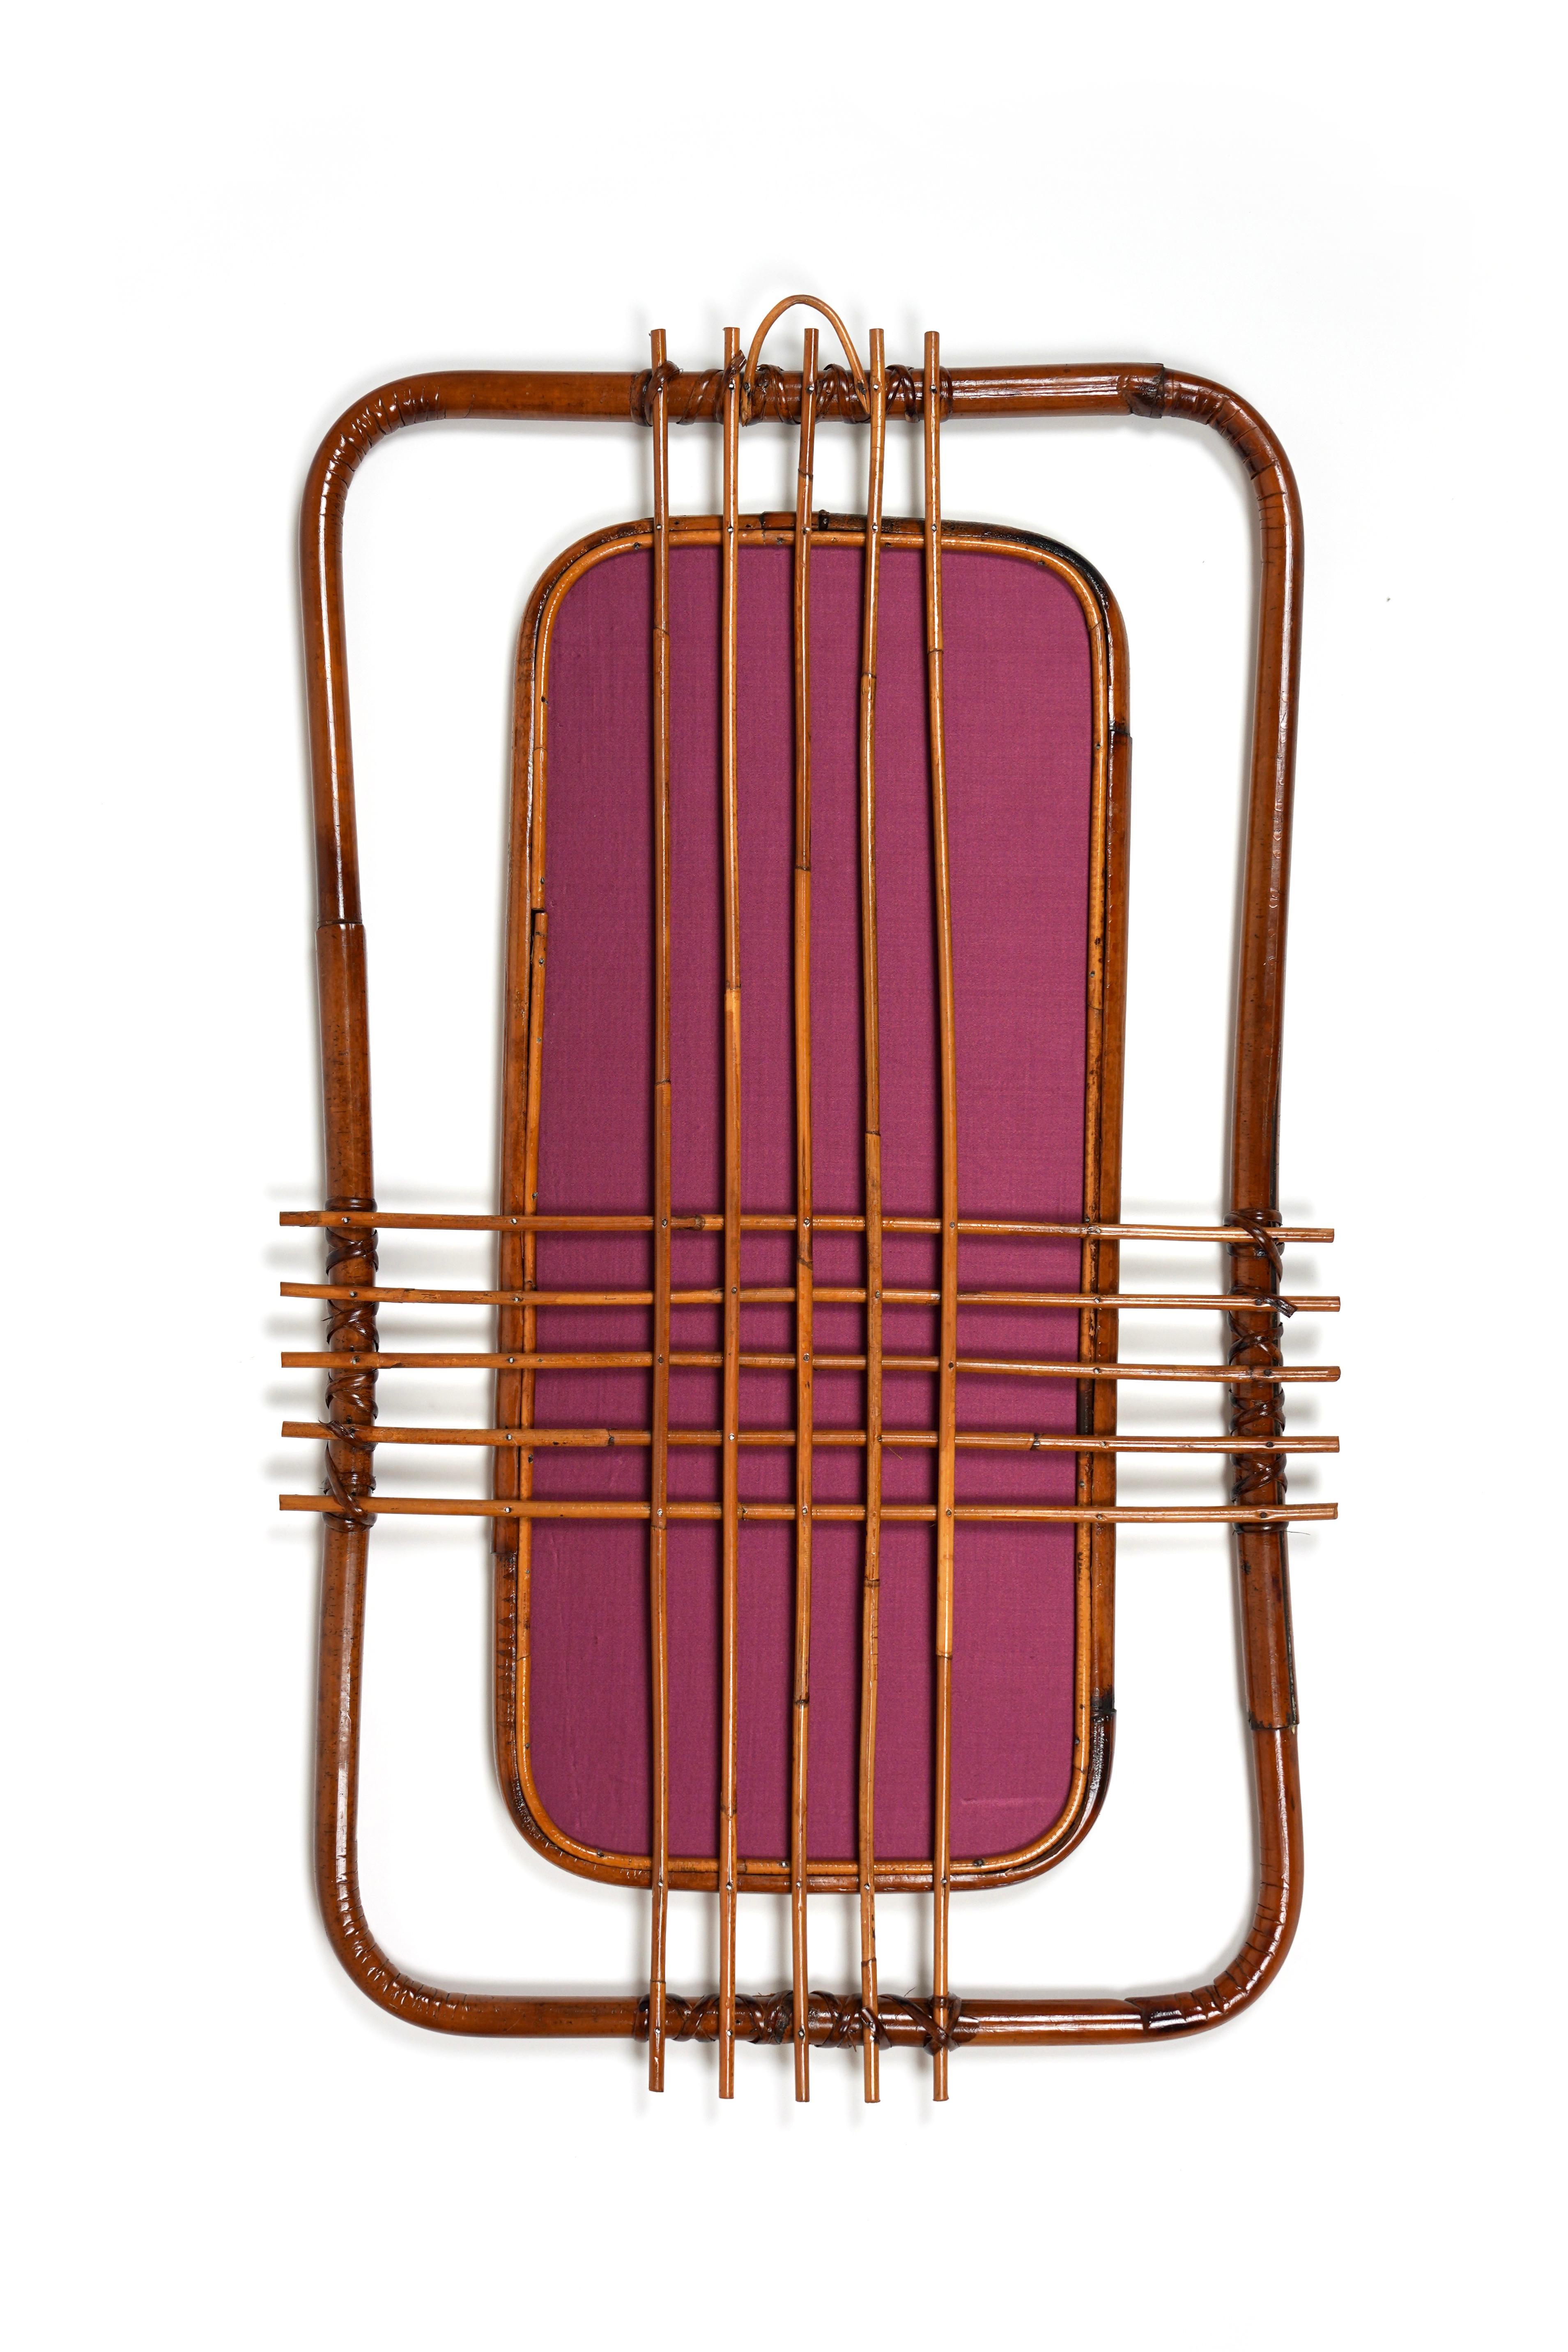 Midcentury Bamboo and Rattan Geometric Wall Mirror, Italy, 1950s For Sale 1